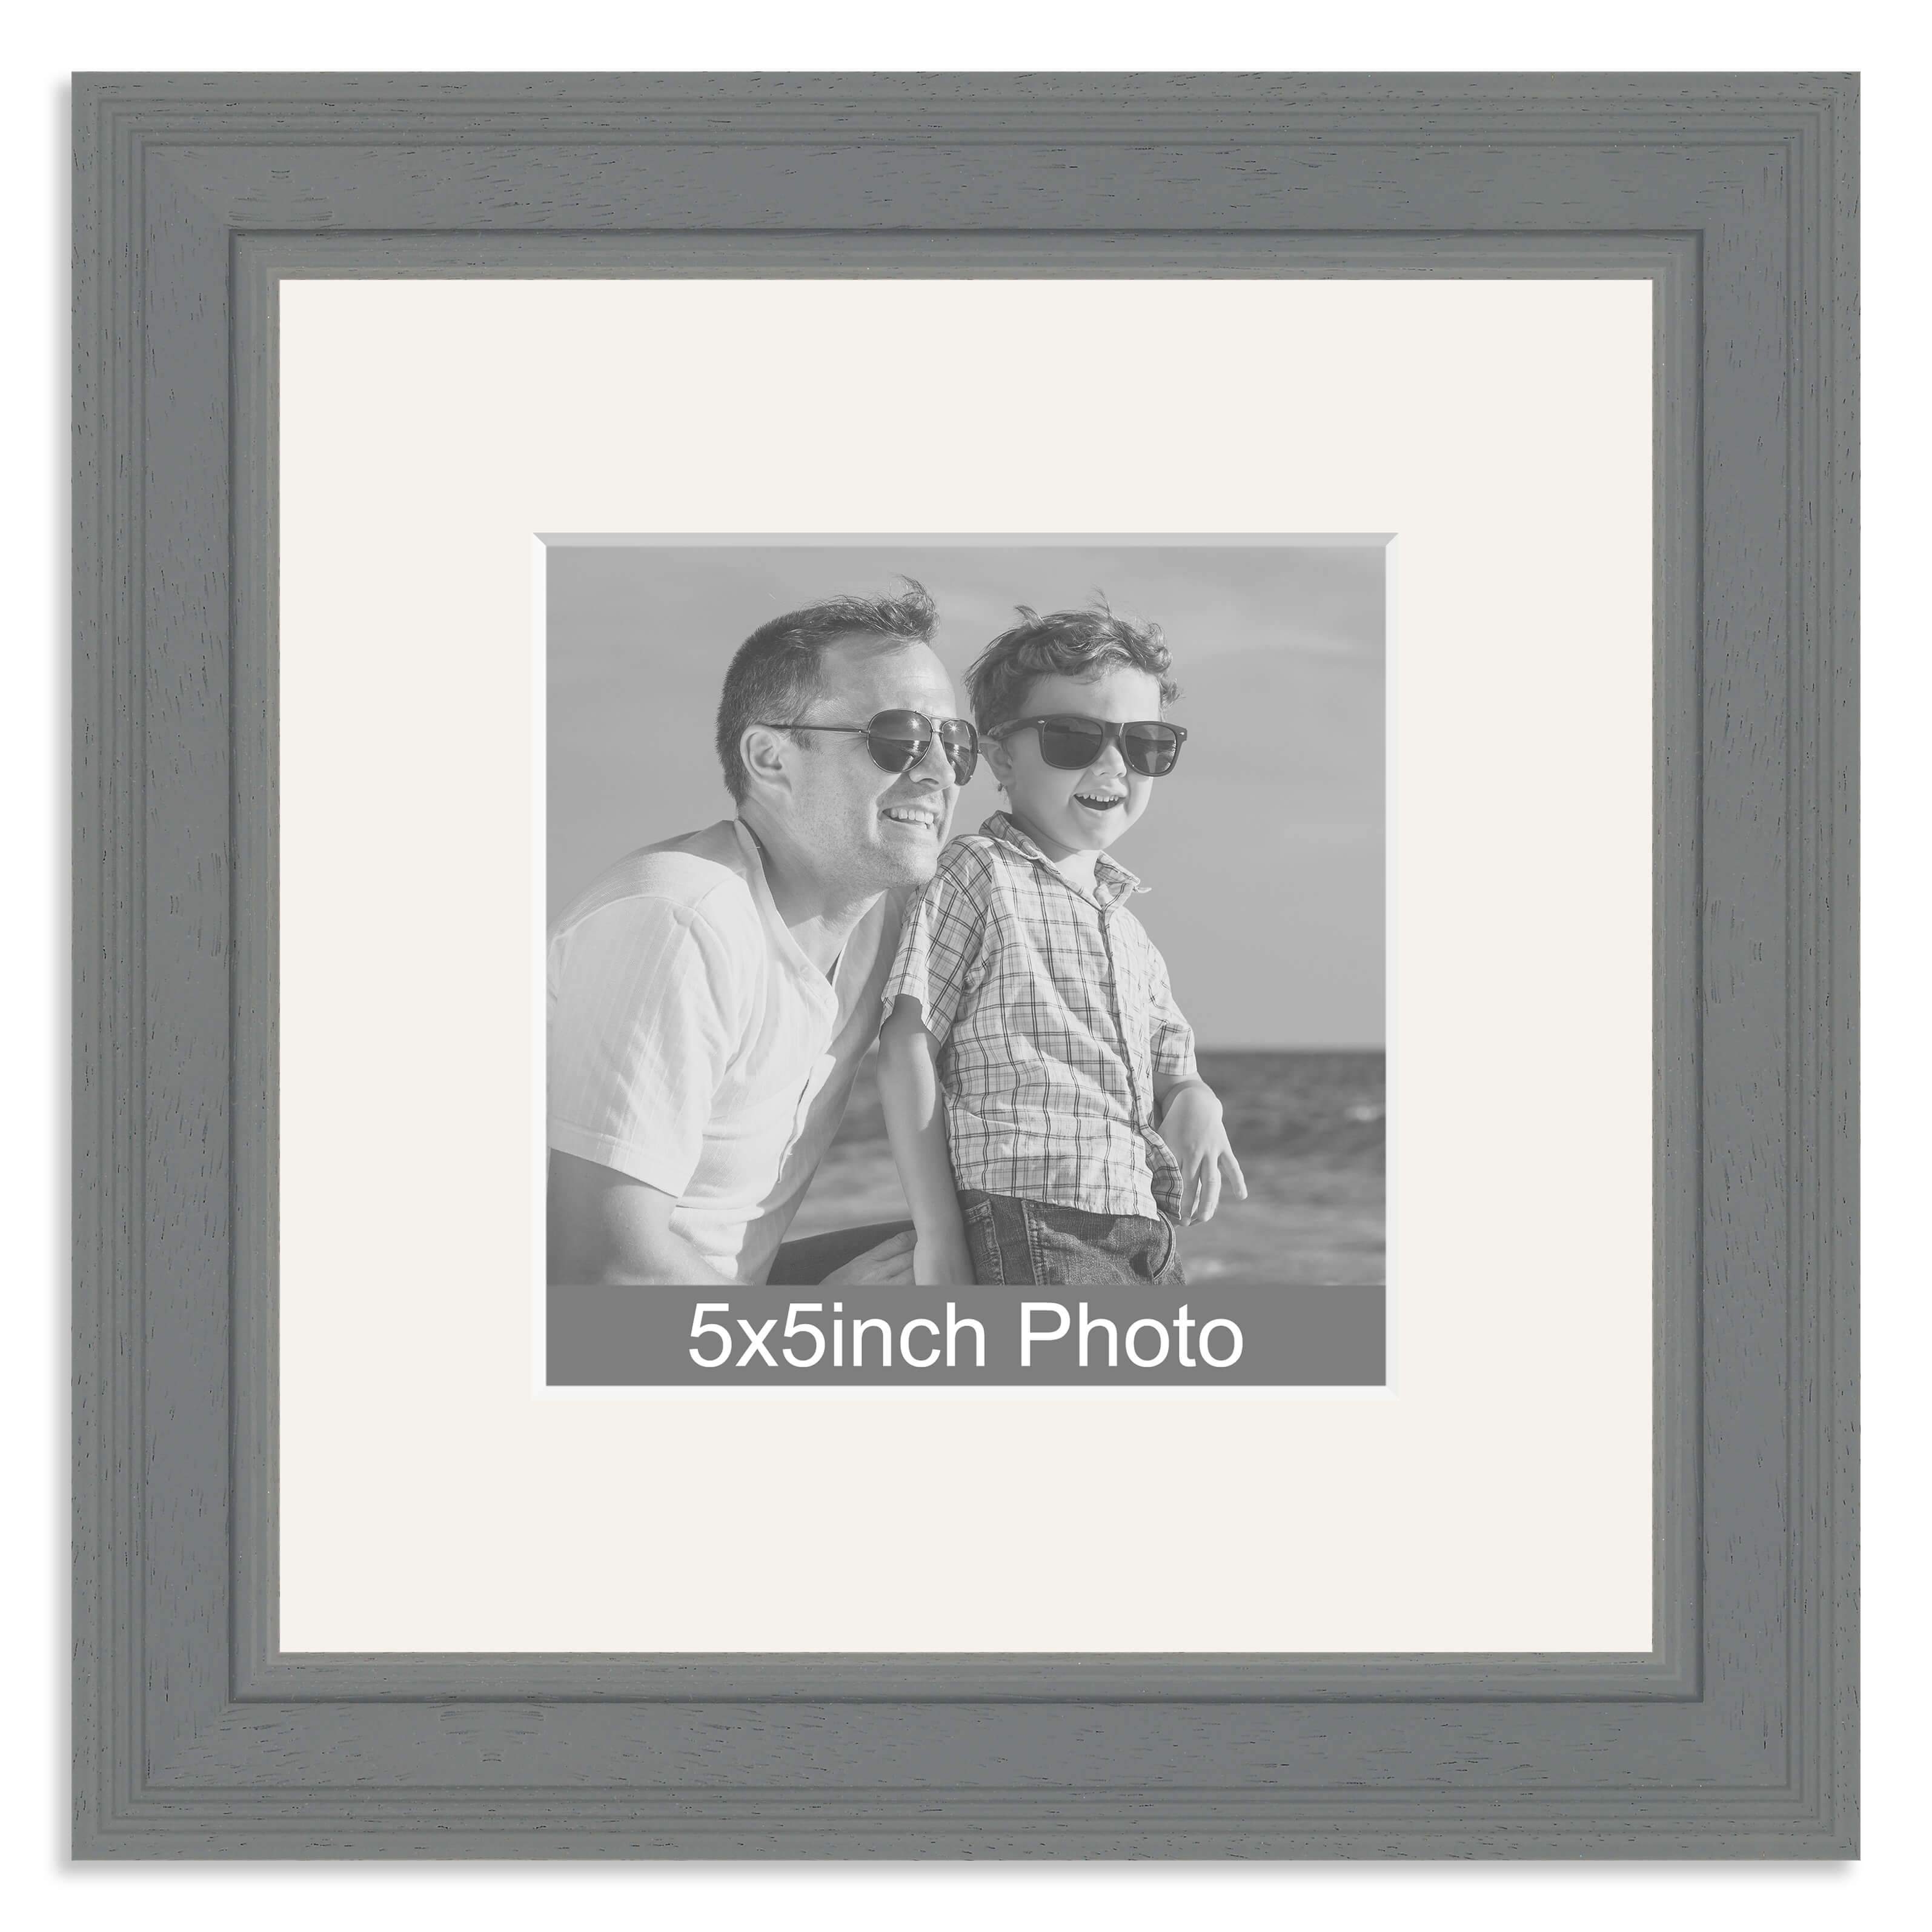 Grey Wooden Photo Frame with mount for a 5x5in Photo